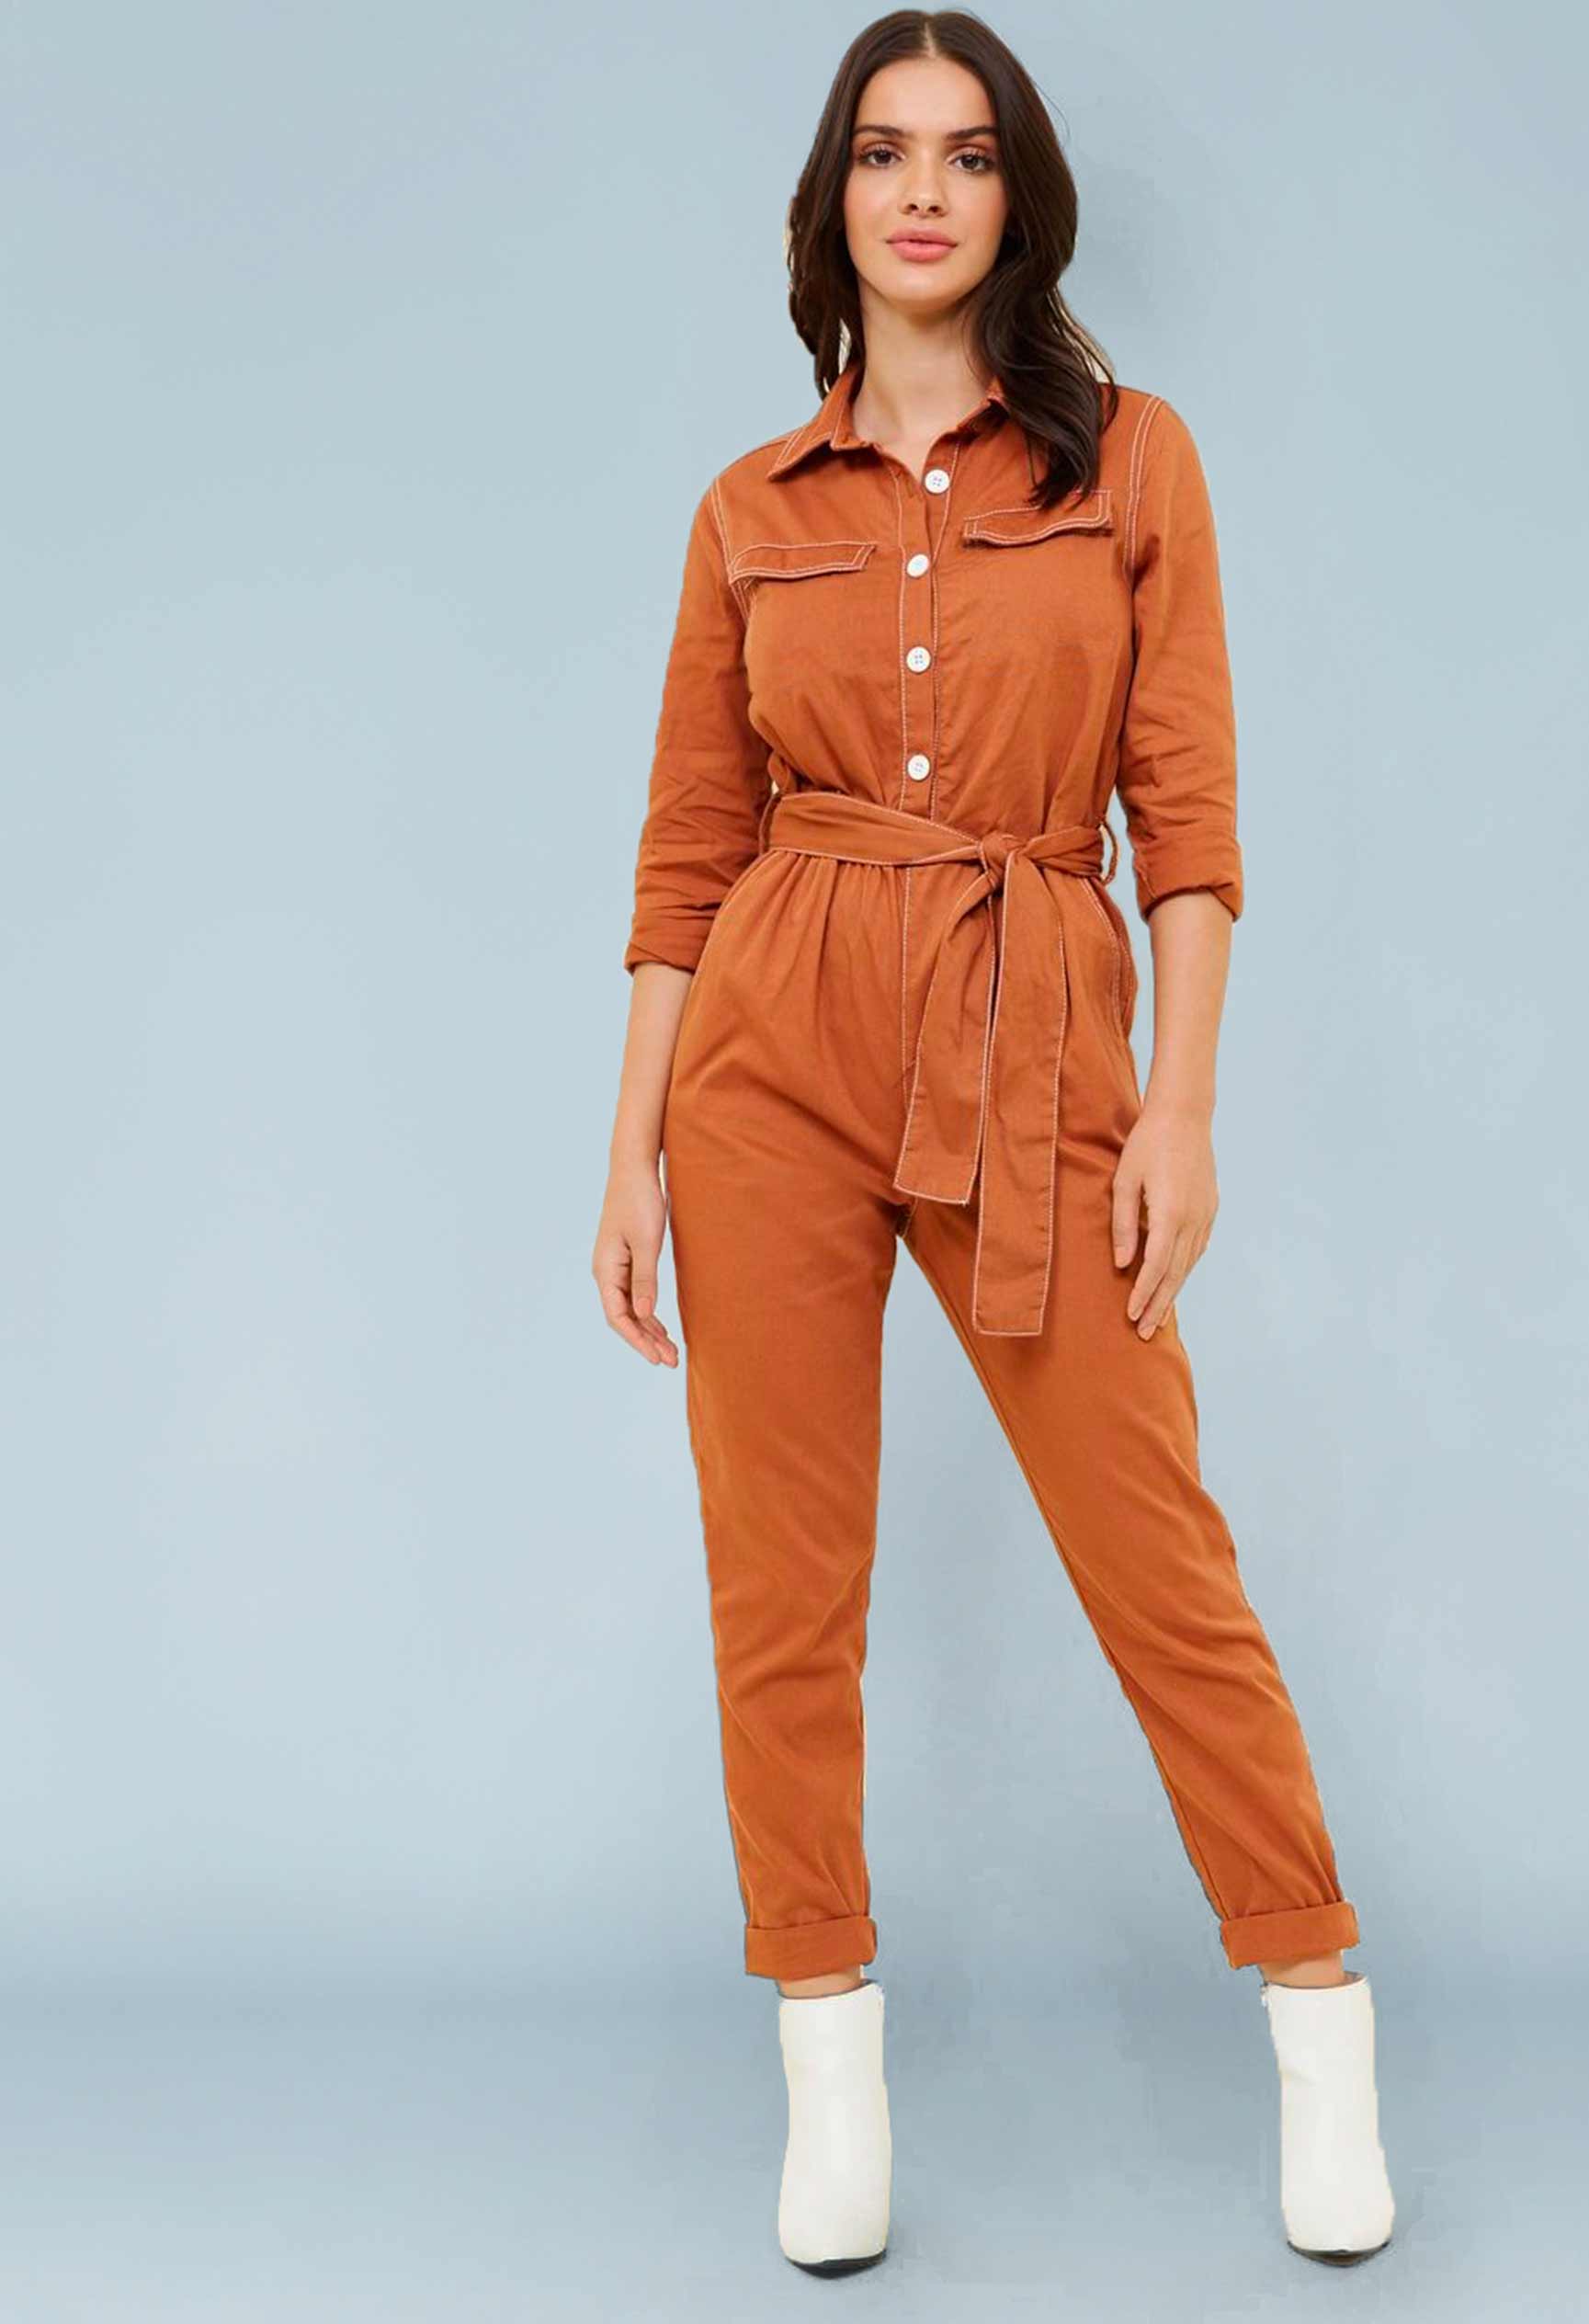 Woman wearing the Gimlet Boilersuit sewing pattern from Our Lady of Leisure on The Fold Line. A boilersuit pattern made in broadcloth, twill, canvas, denim or satin fabrics, featuring hip pockets, faux breast pockets, buttoned bodice closure, loose fit, t